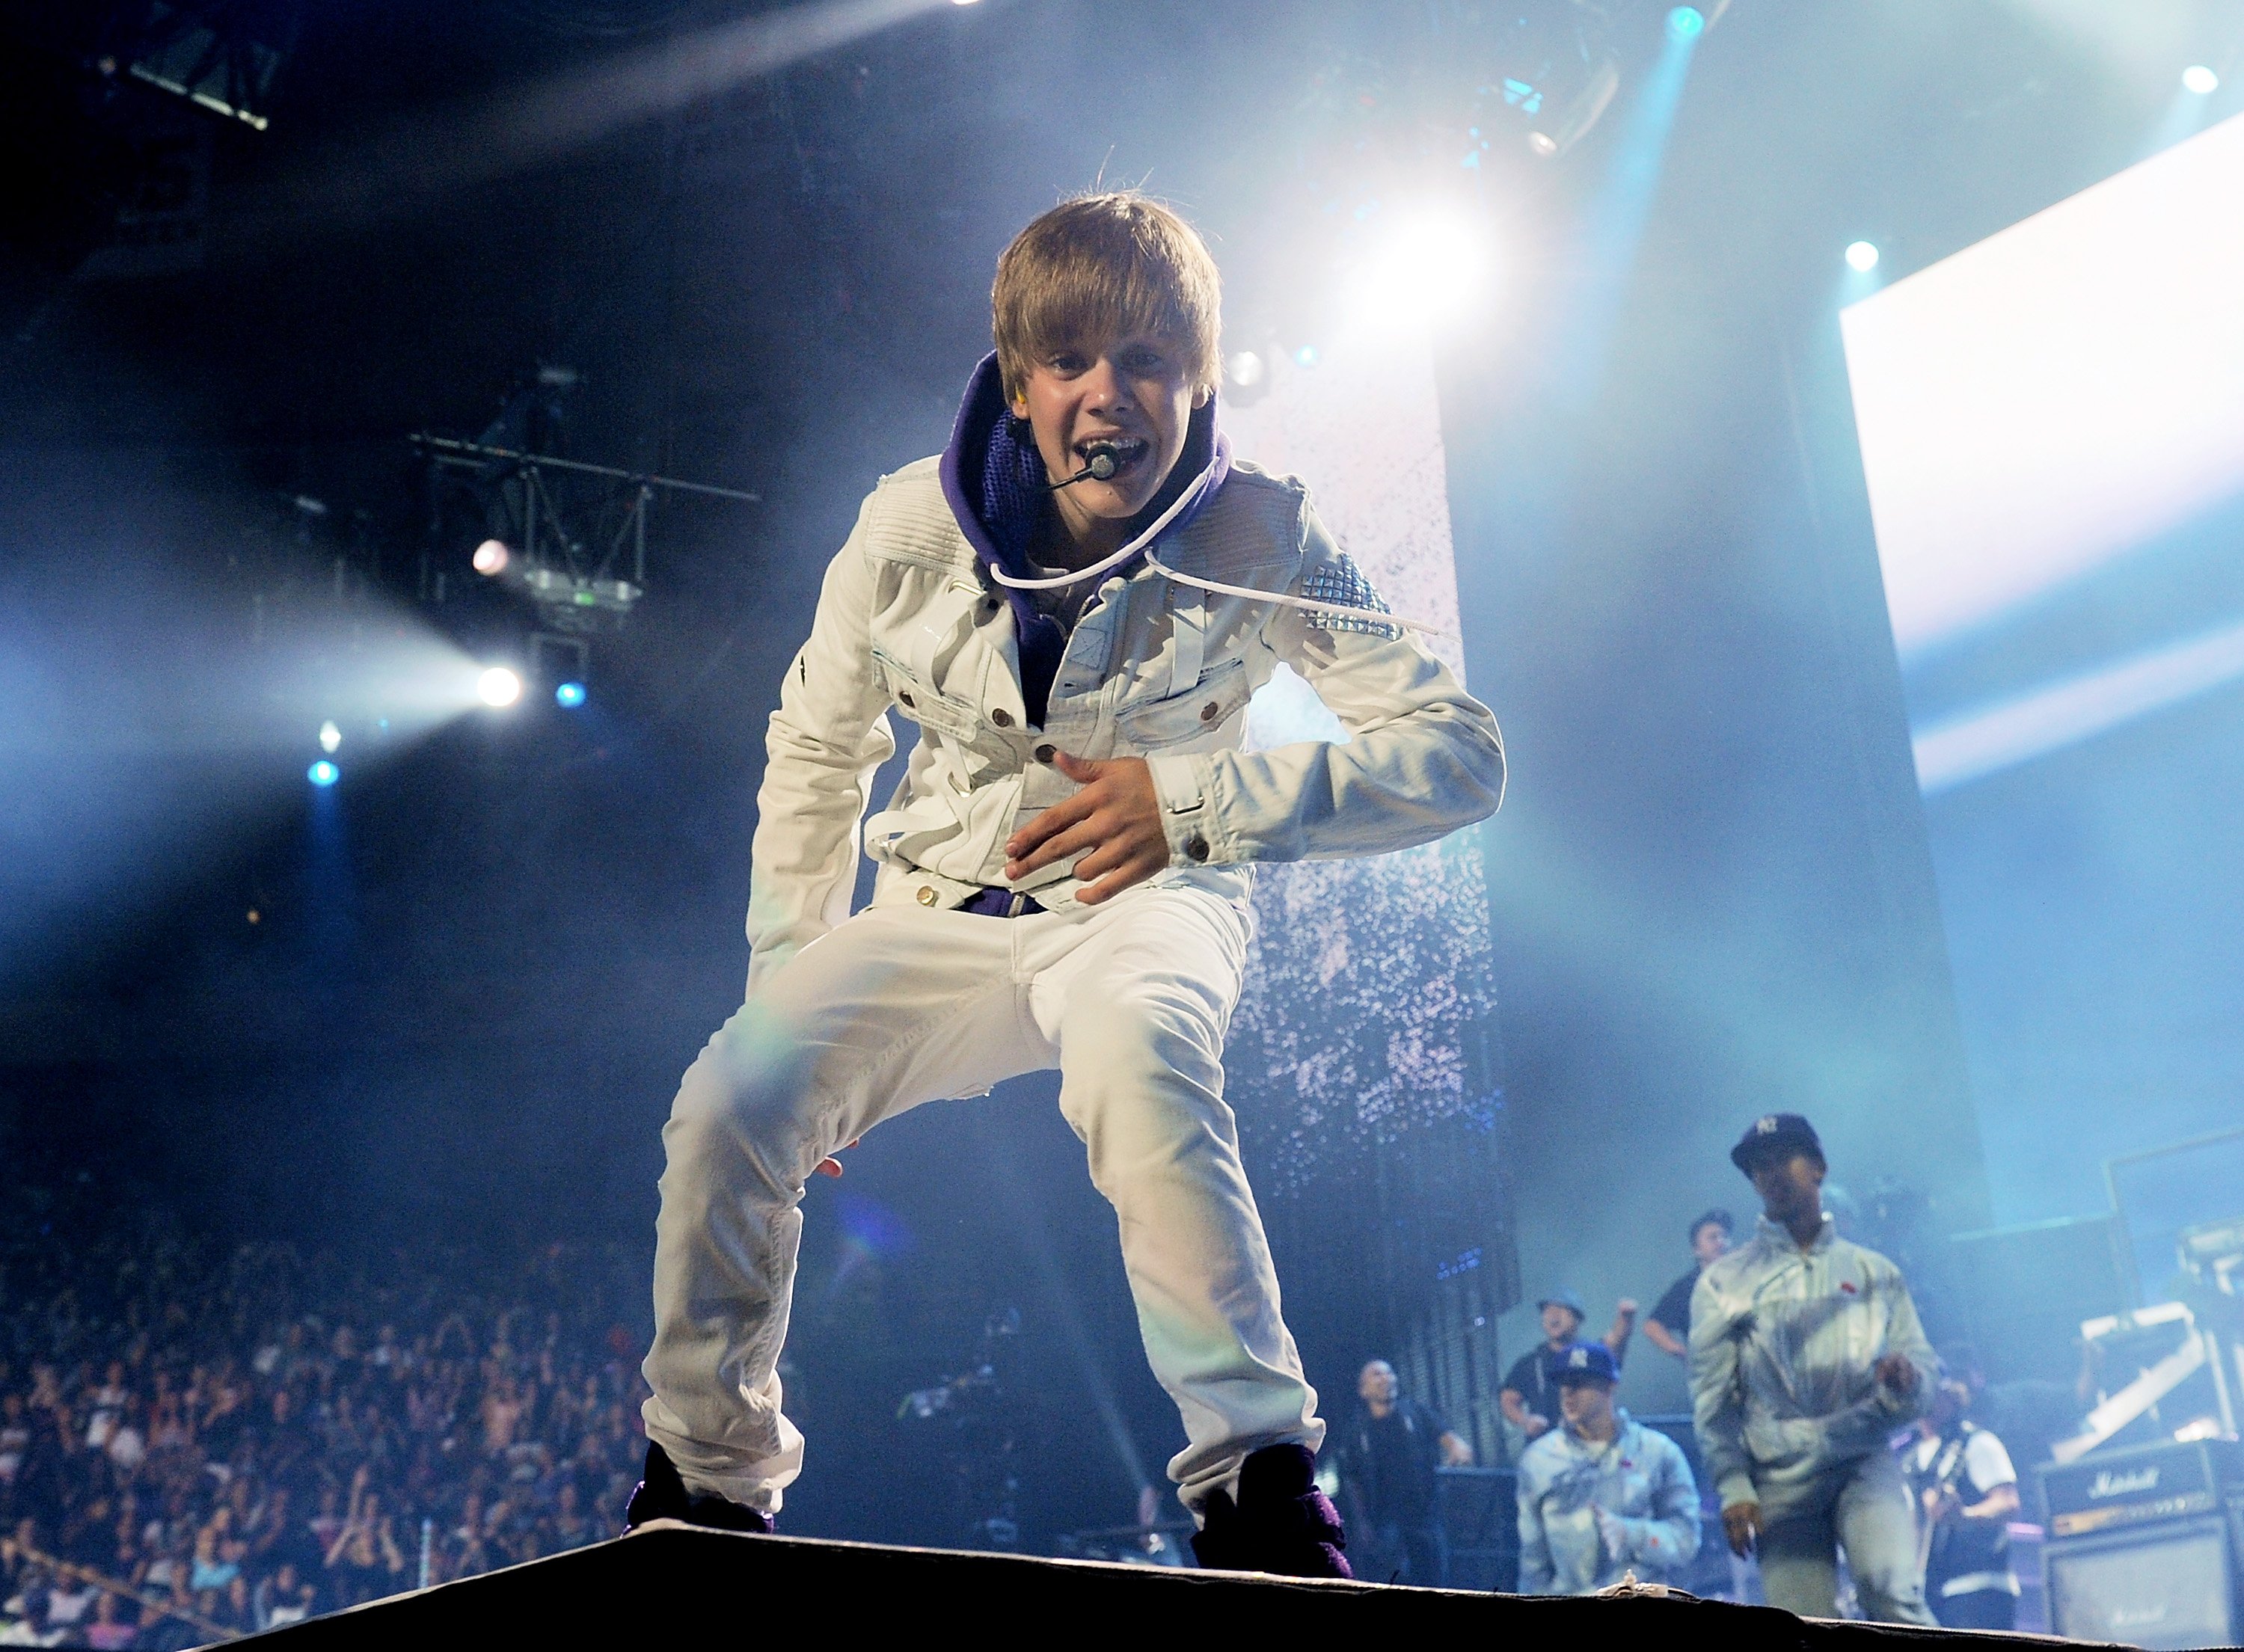 Singer Justin Bieber performs at Madison Square Garden on Tuesday, Aug. 31, 2010 in New York. (AP Photo/Evan Agostini)